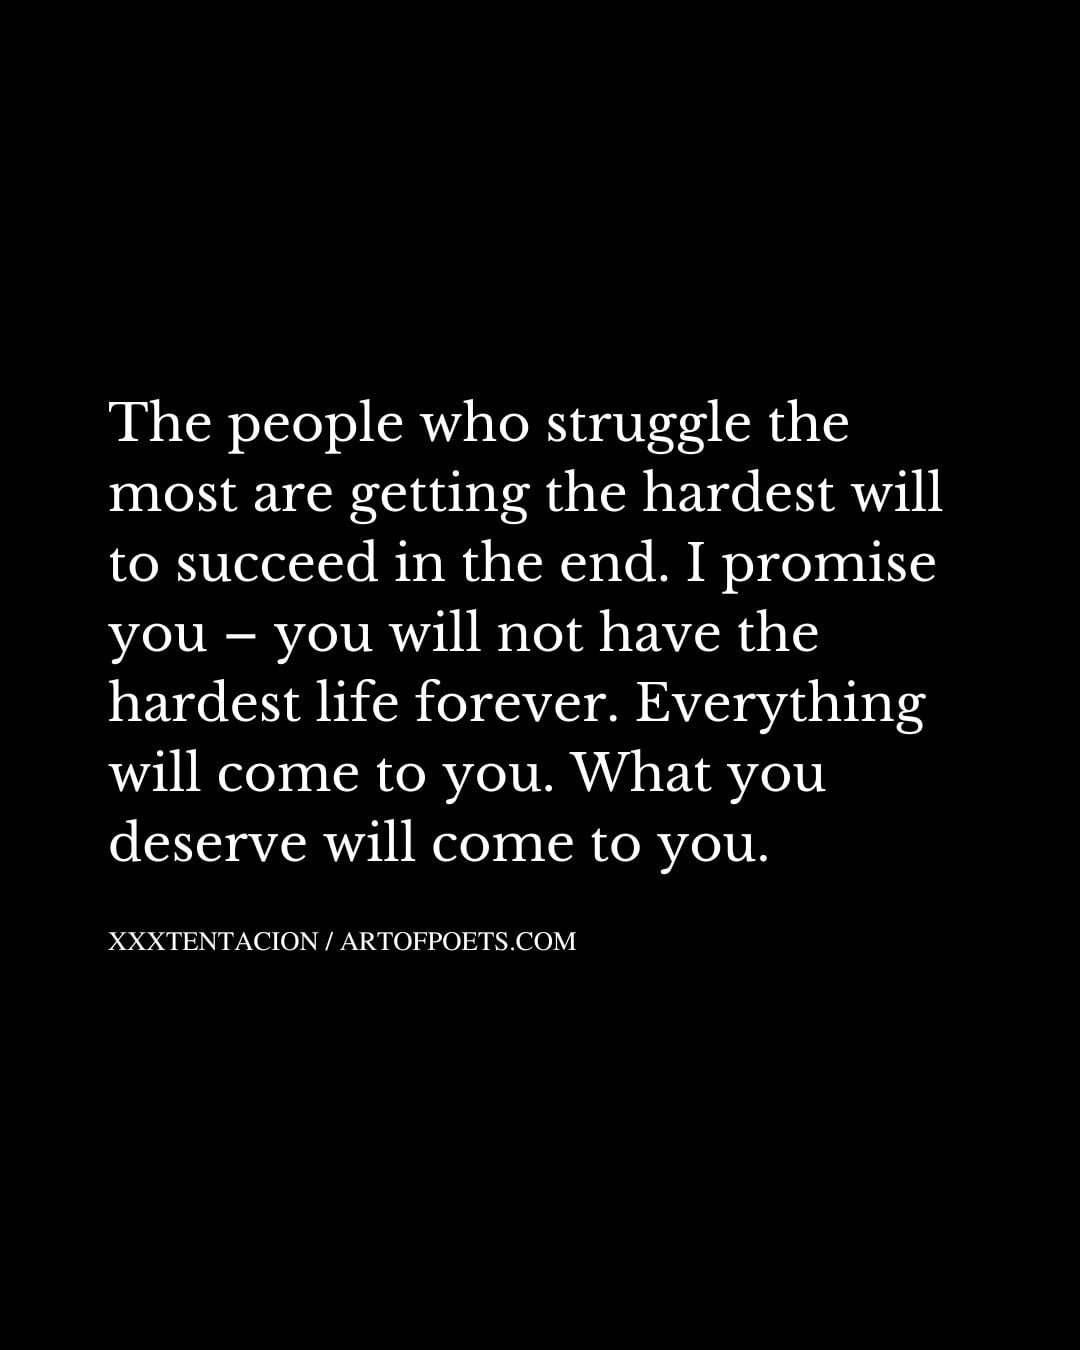 The people who struggle the most are getting the hardest will to succeed in the end. I promise you